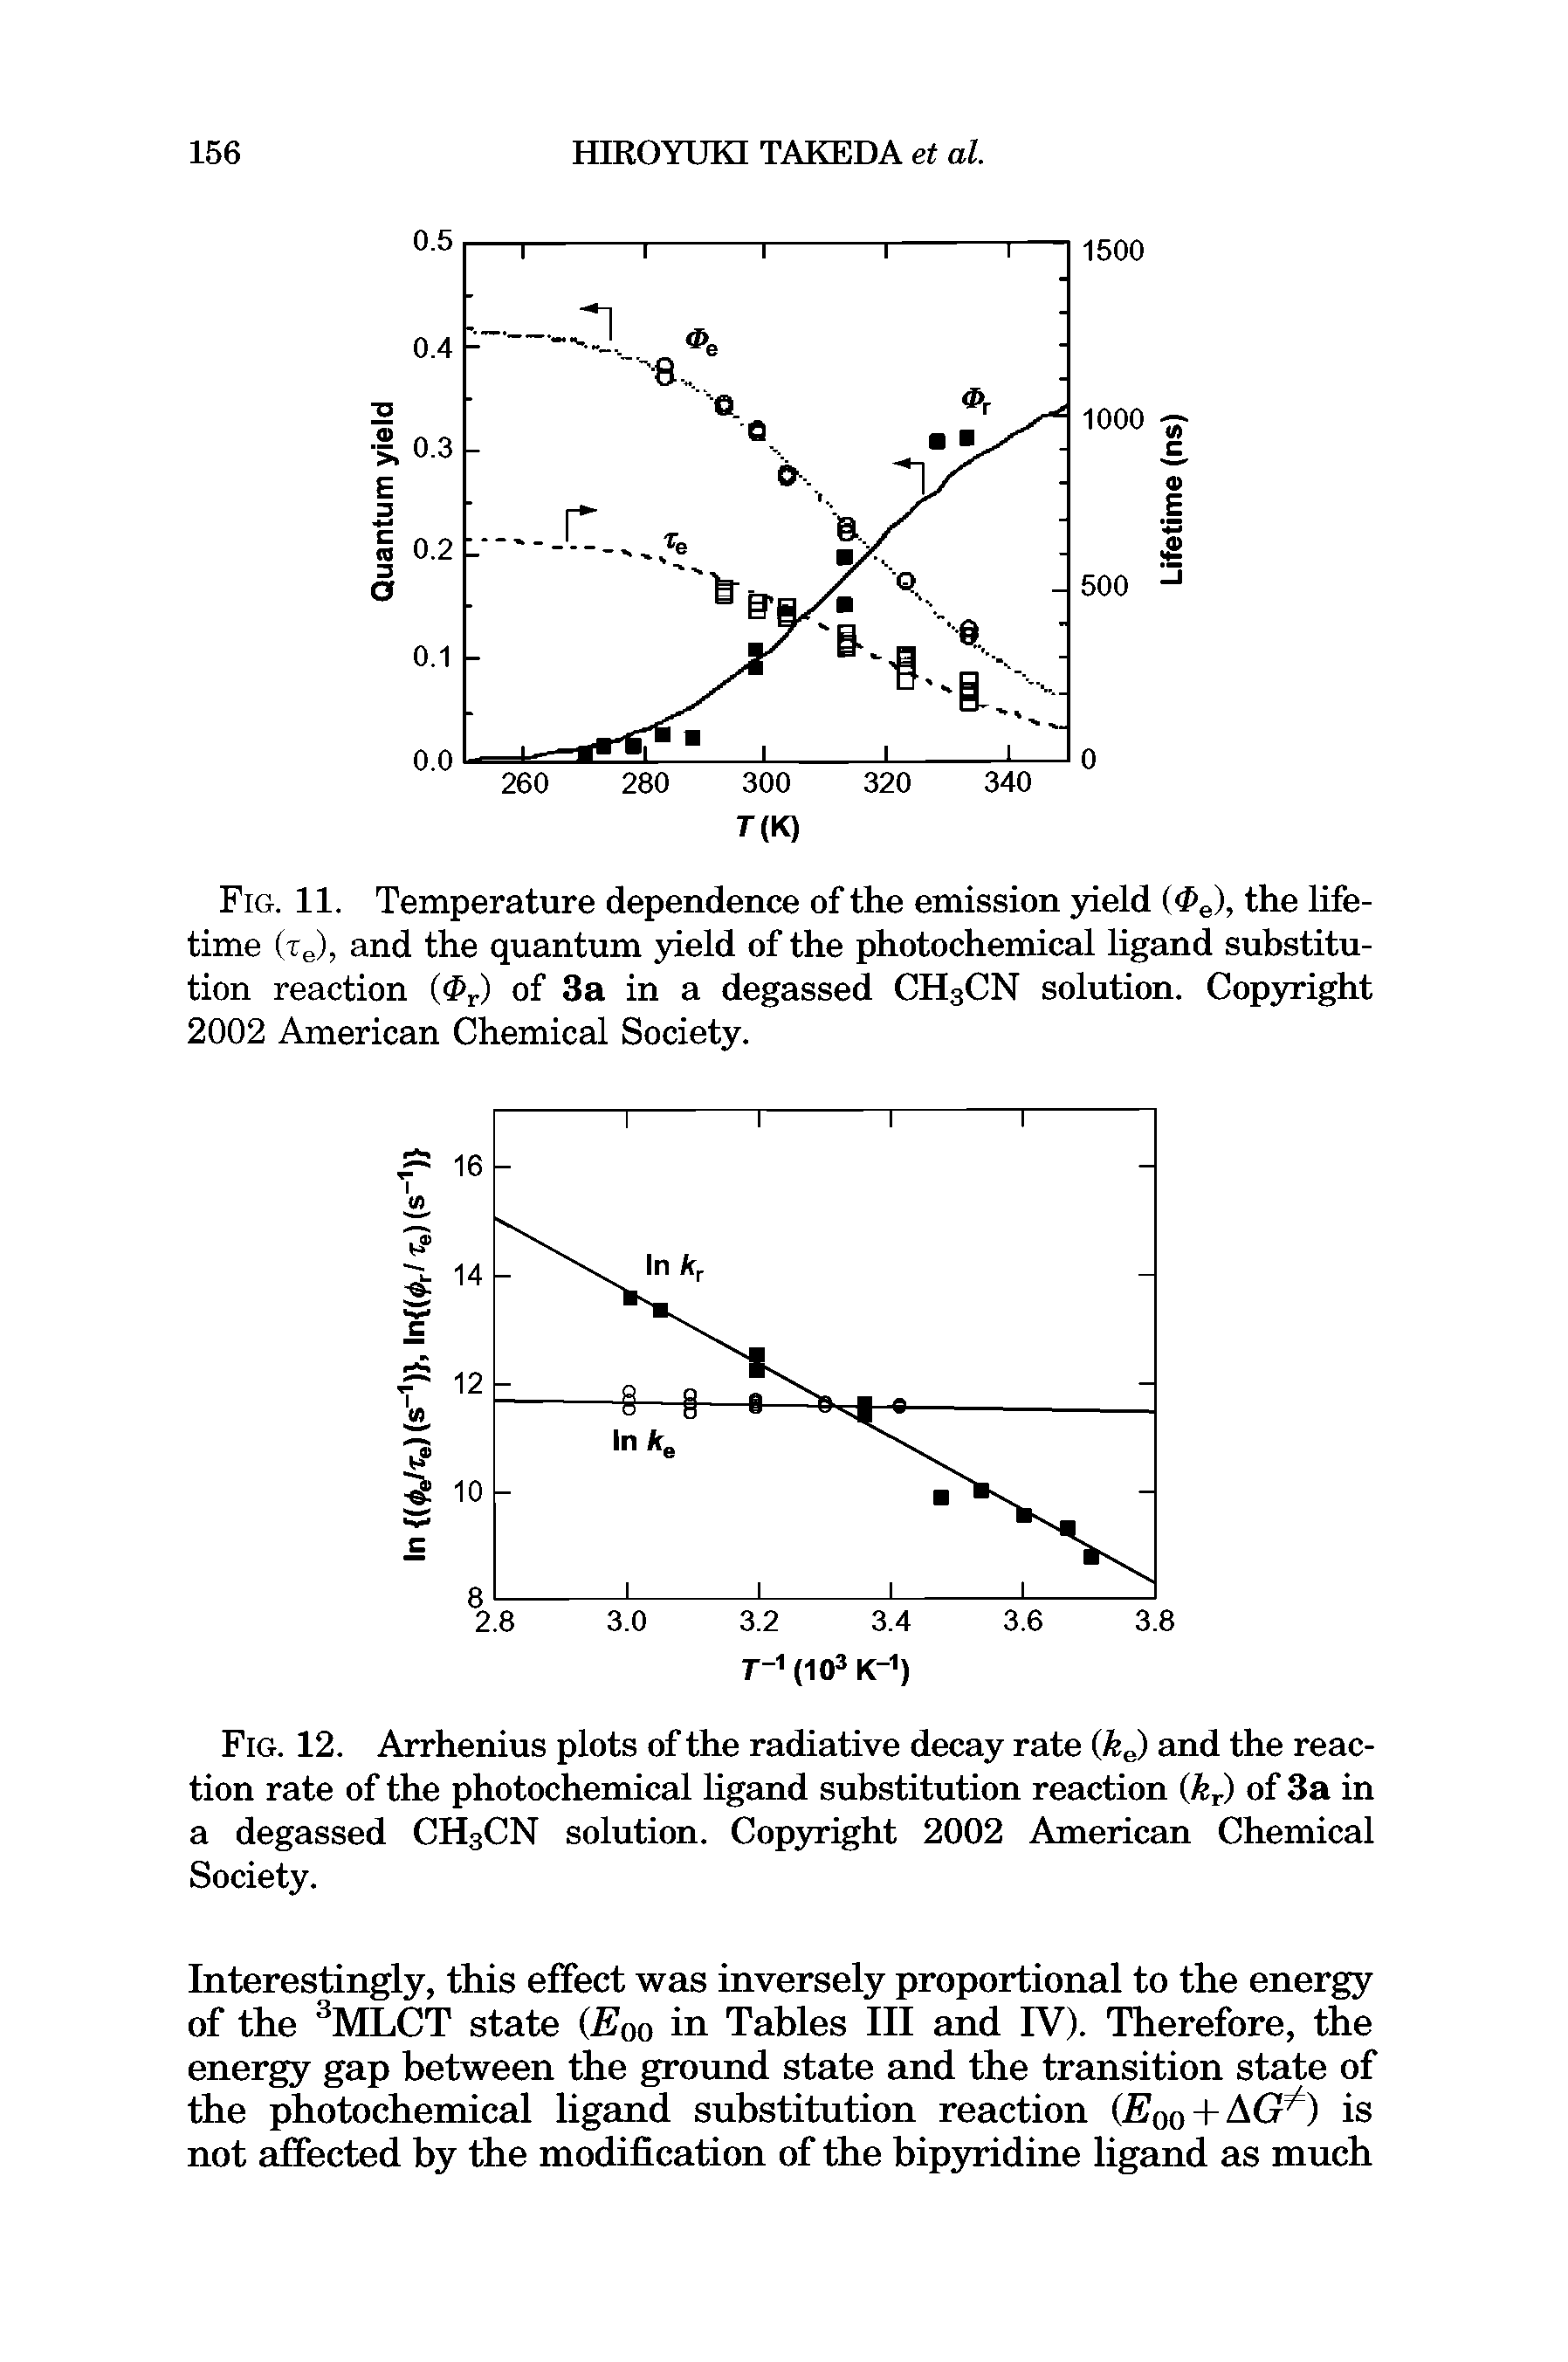 Fig. 12. Arrhenius plots of the radiative decay rate (kj and the reaction rate of the photochemical ligand substitution reaction (kr) of 3a in a degassed CH3CN solution. Copyright 2002 American Chemical Society.